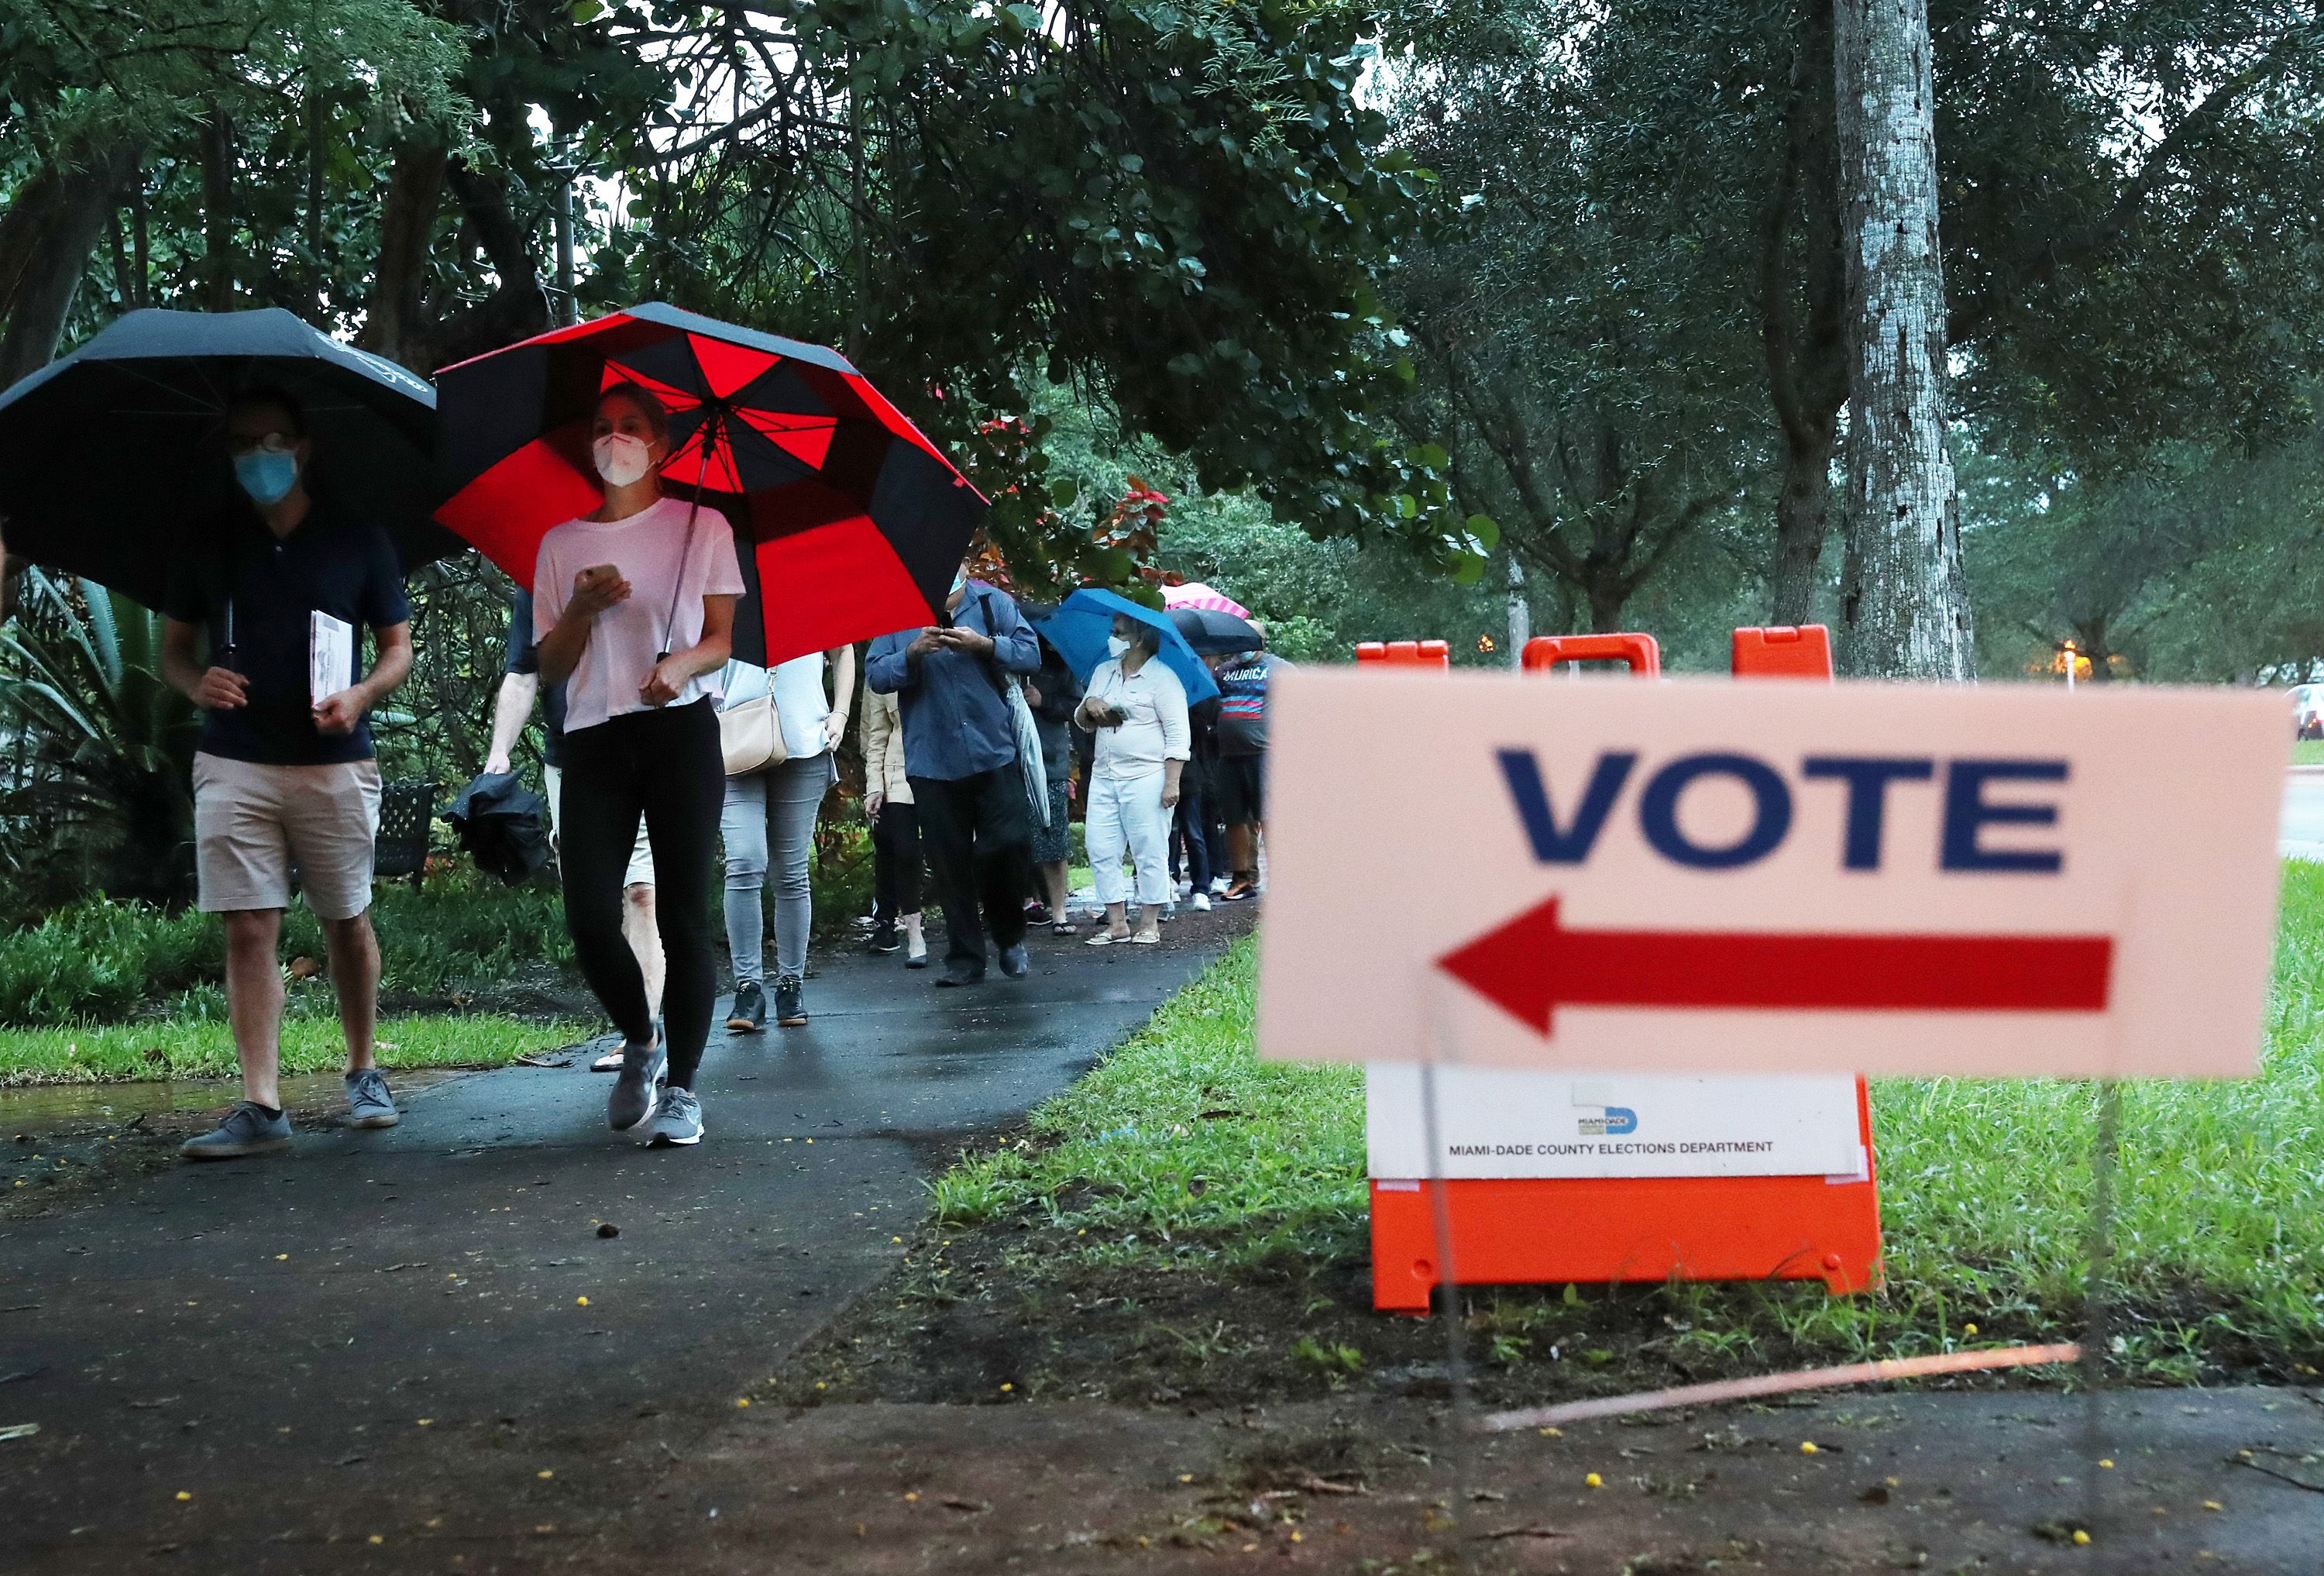 A line of people holding umbrellas stand outside in front of trees to vote